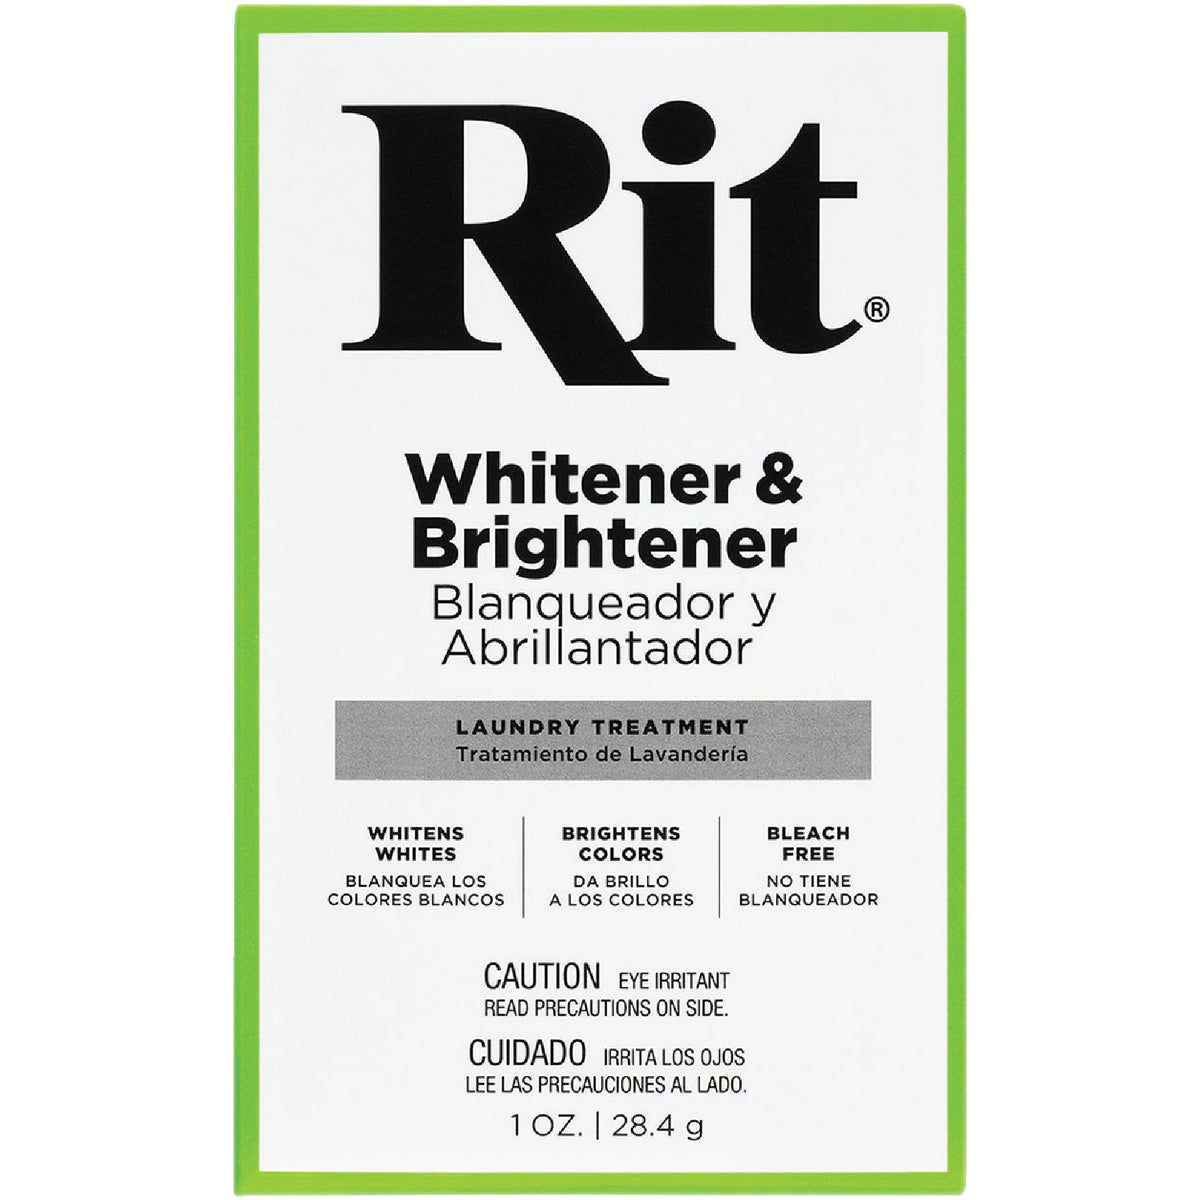 How to Use RIT White Wash and Brightener